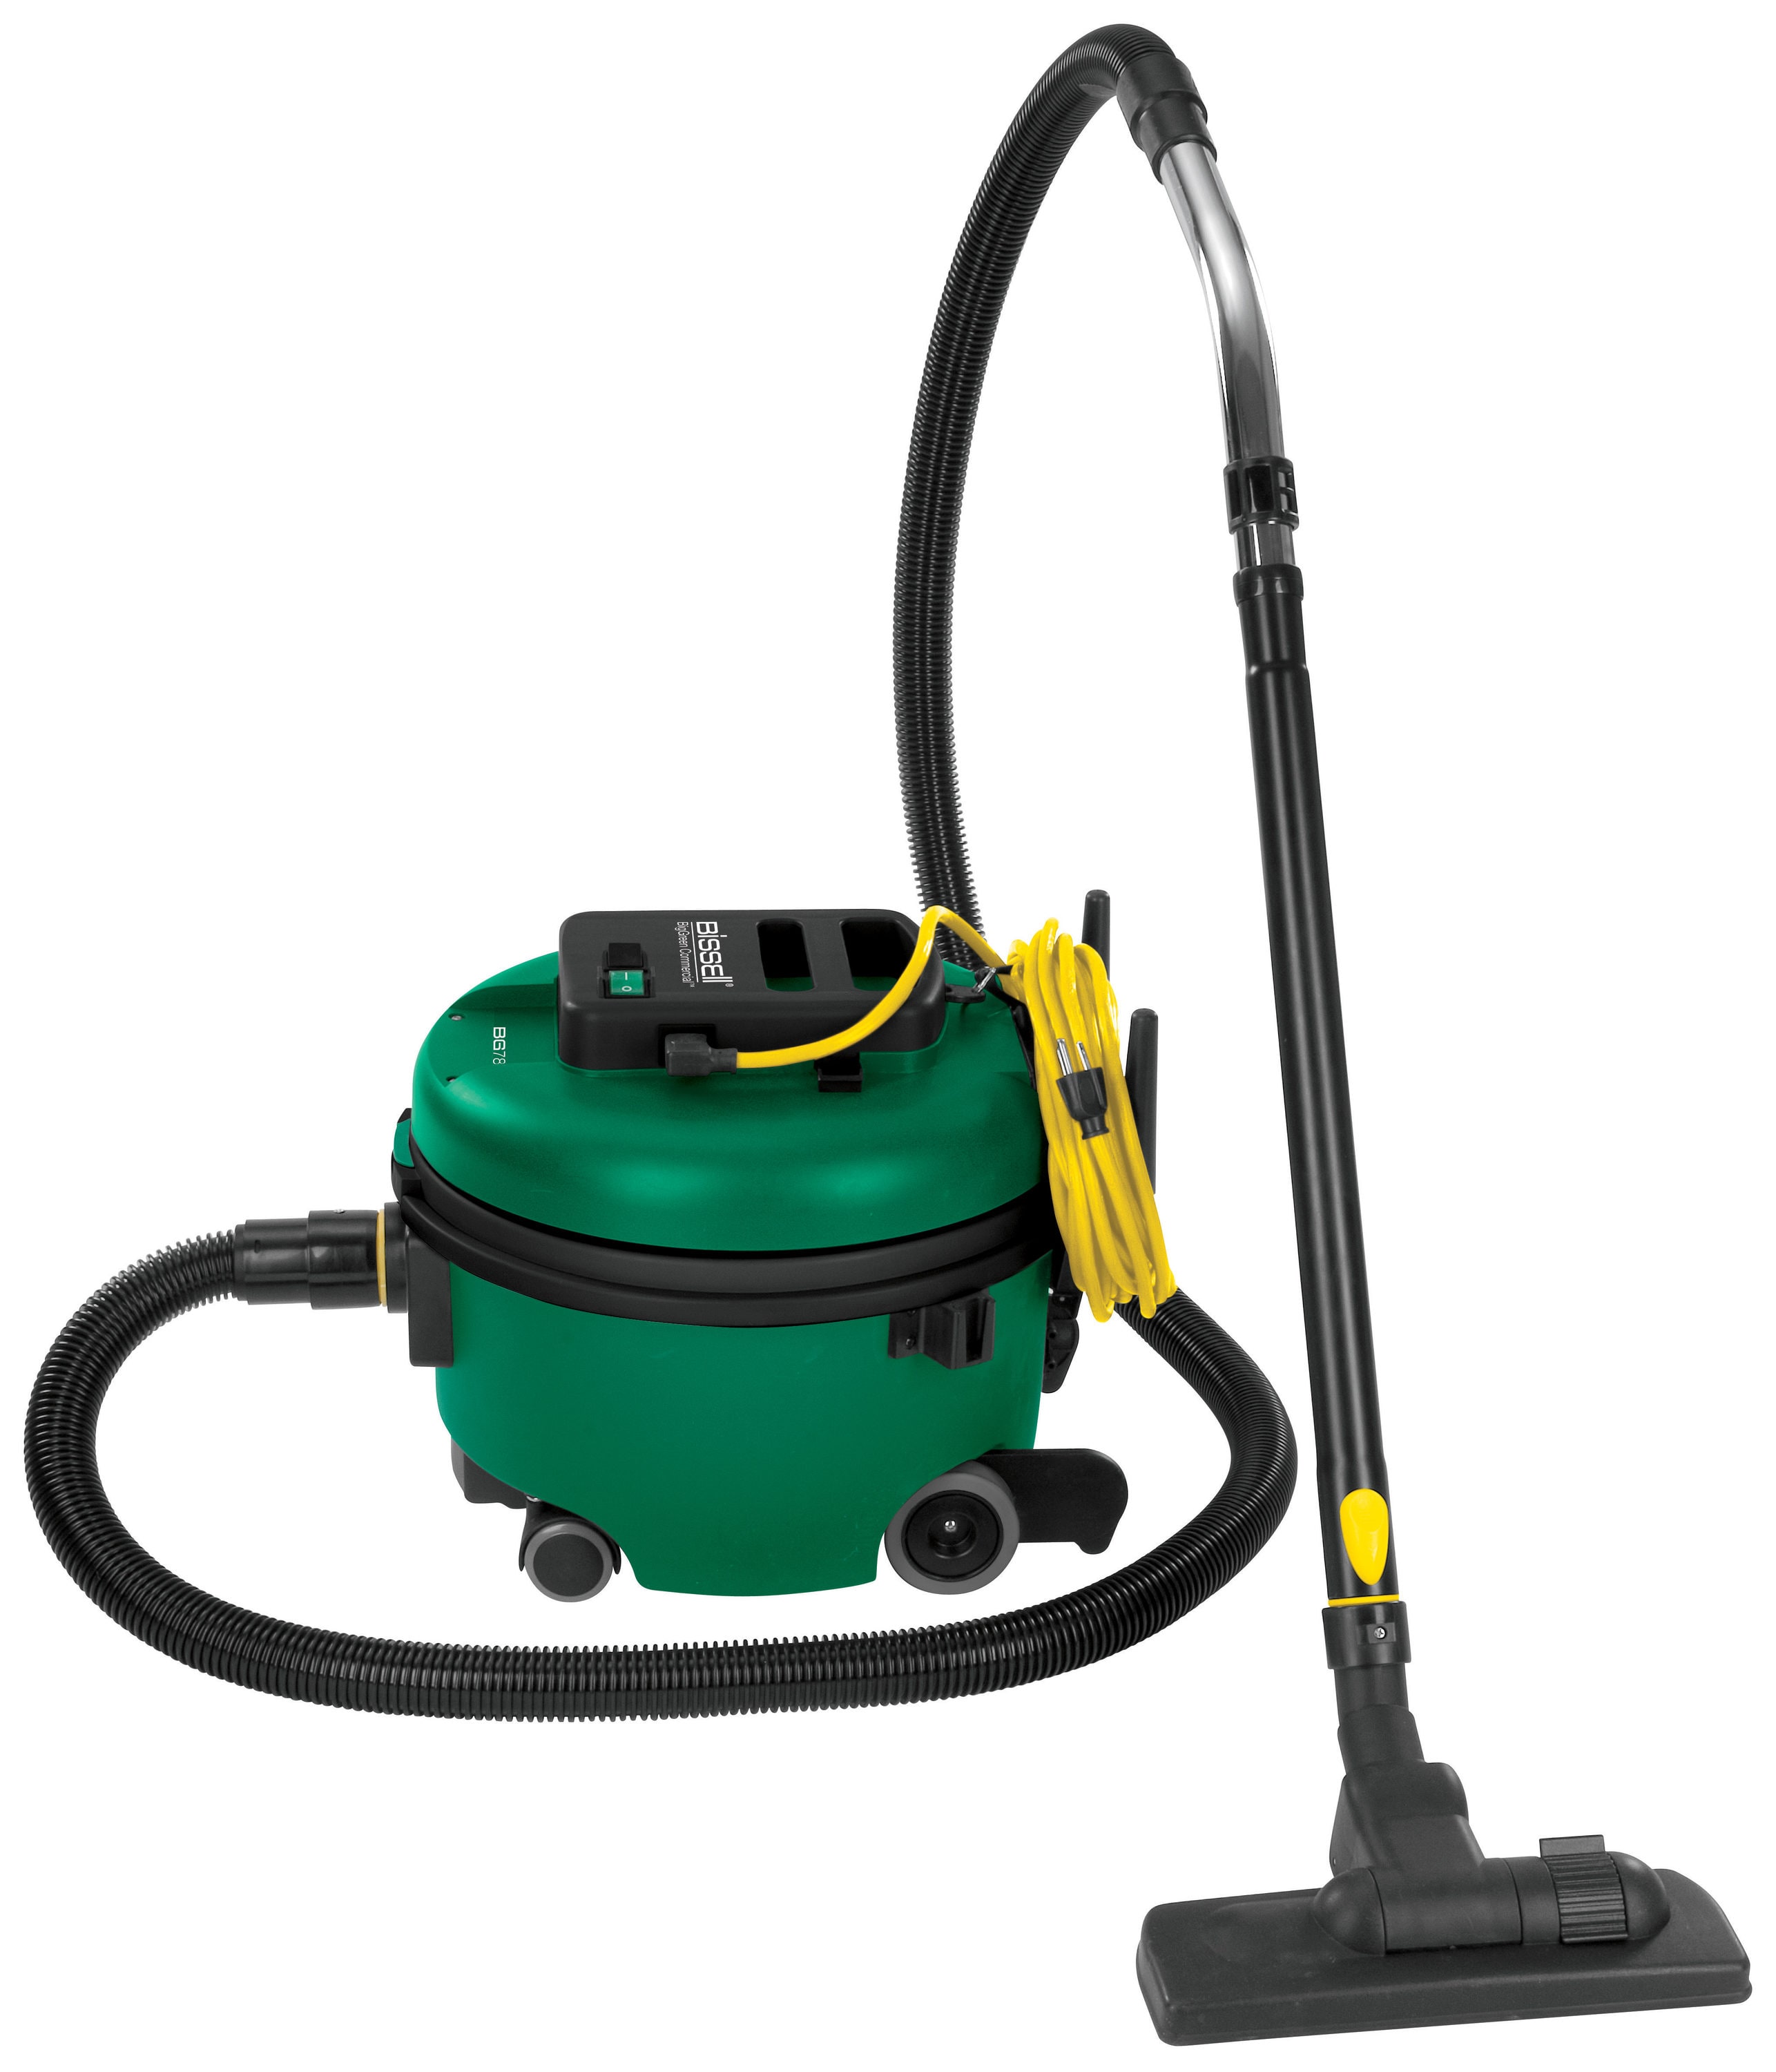 Big Green Commercial Advanced Filtration Canister Vacuum | - Bissell Commercial BGCOMP9H